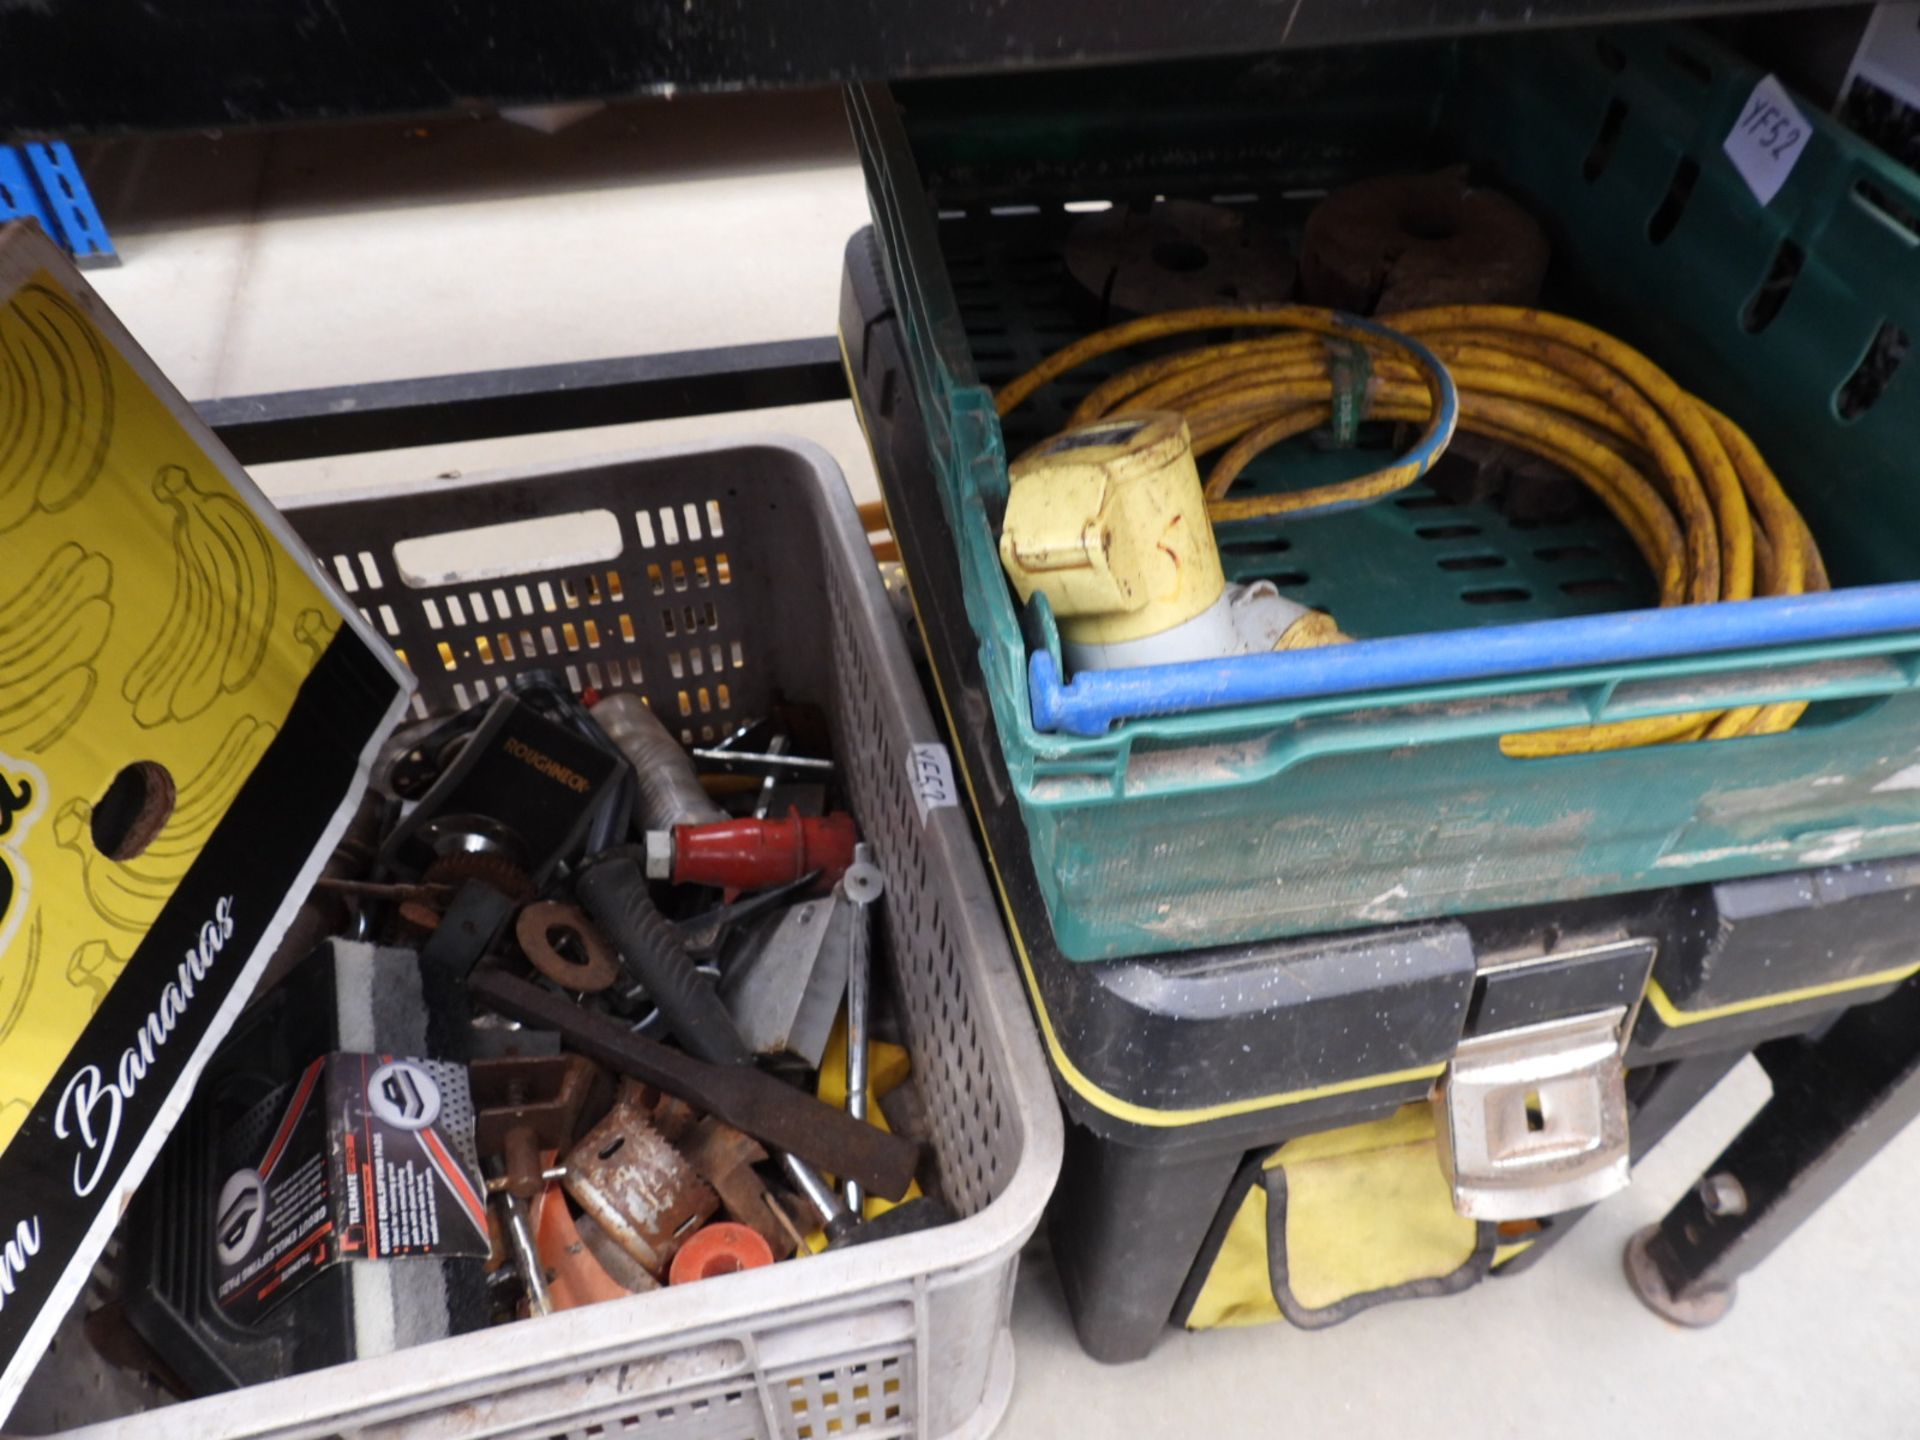 4 boxes of assorted items, including: cable, fixings, work light, tool box etc